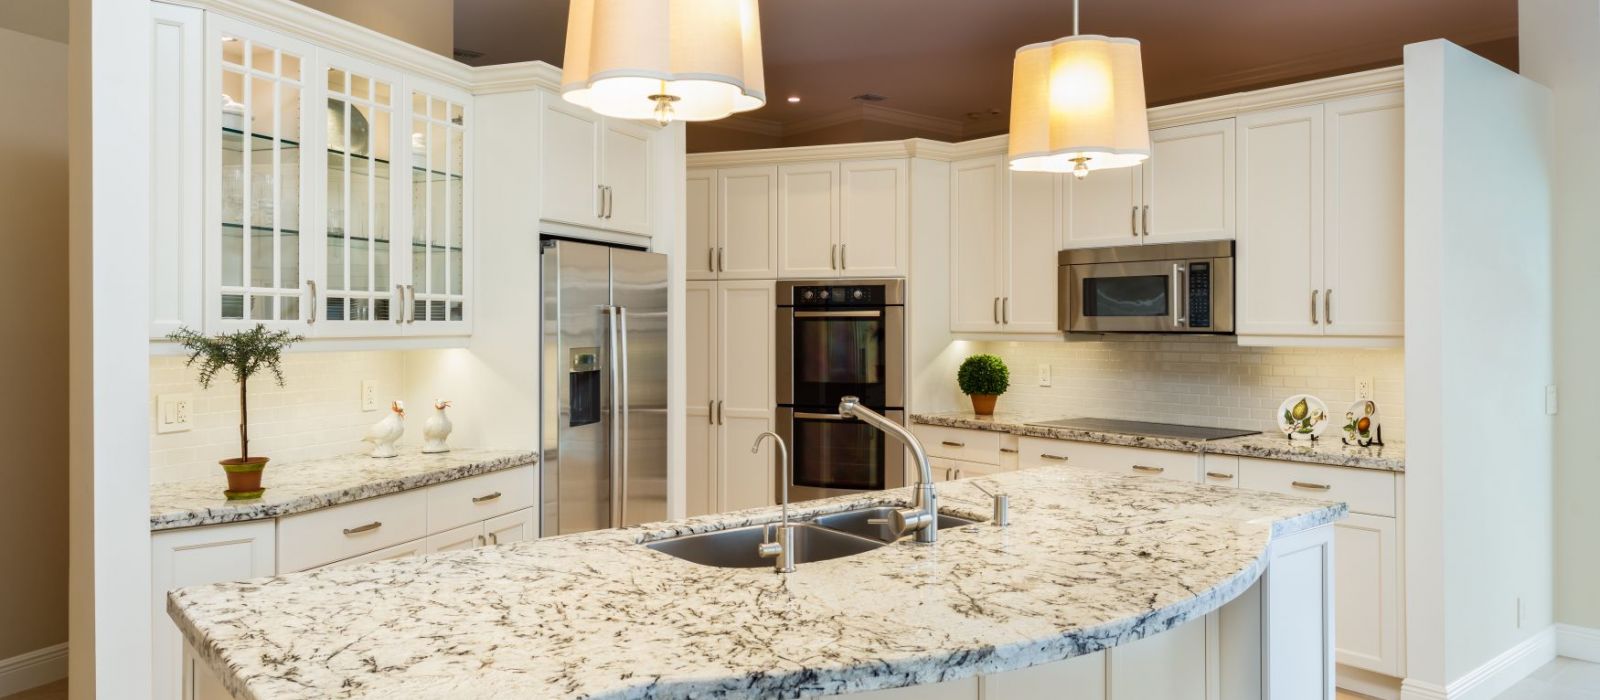 Frugal Kitchens Countertops